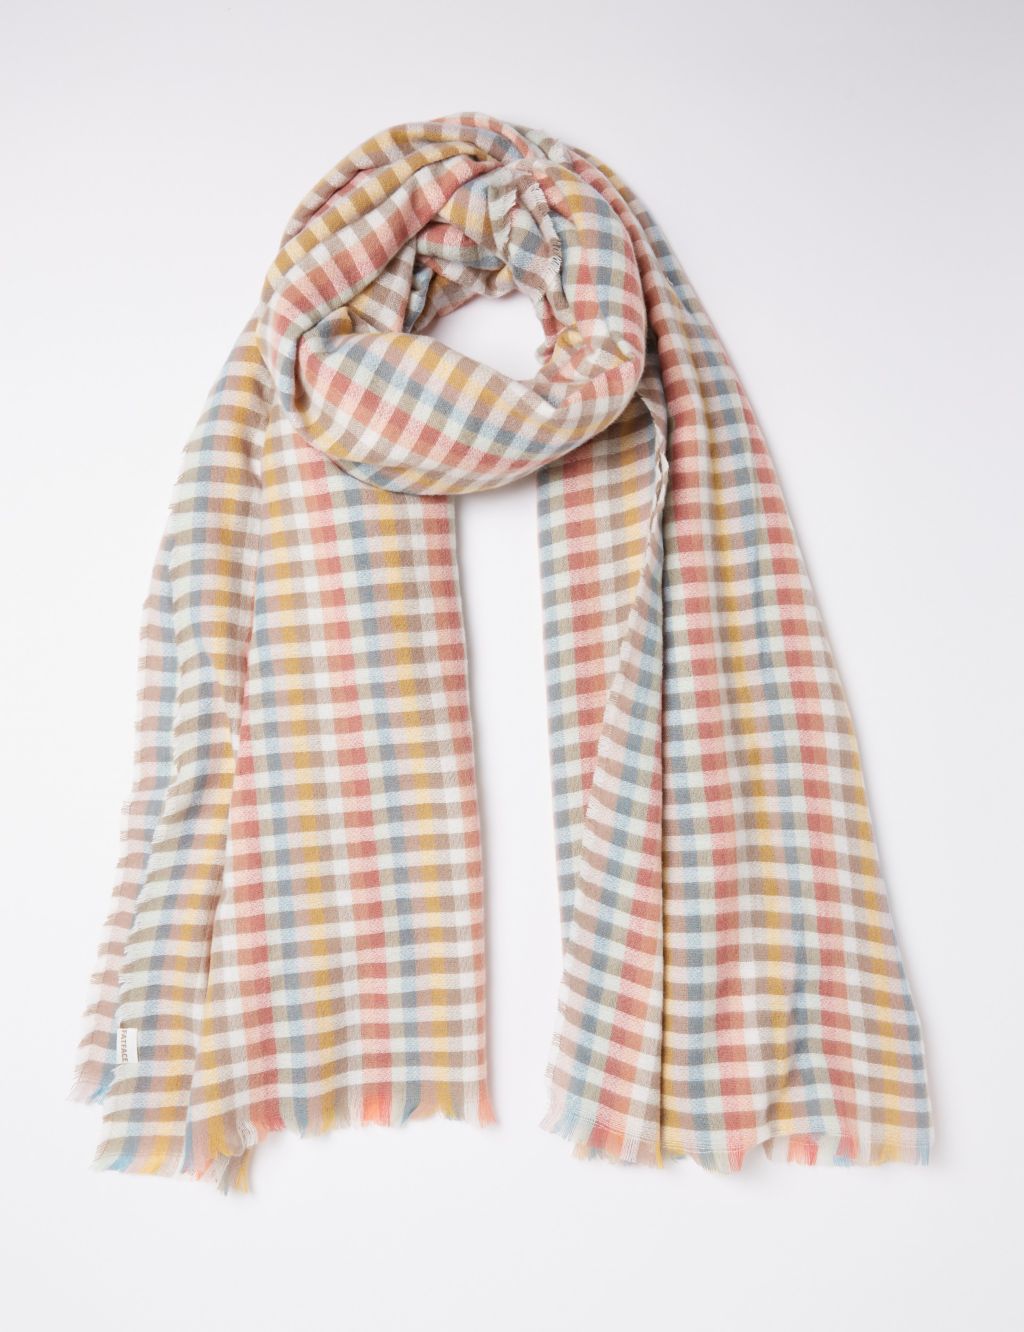 Woven Checked Fringed Scarf image 1